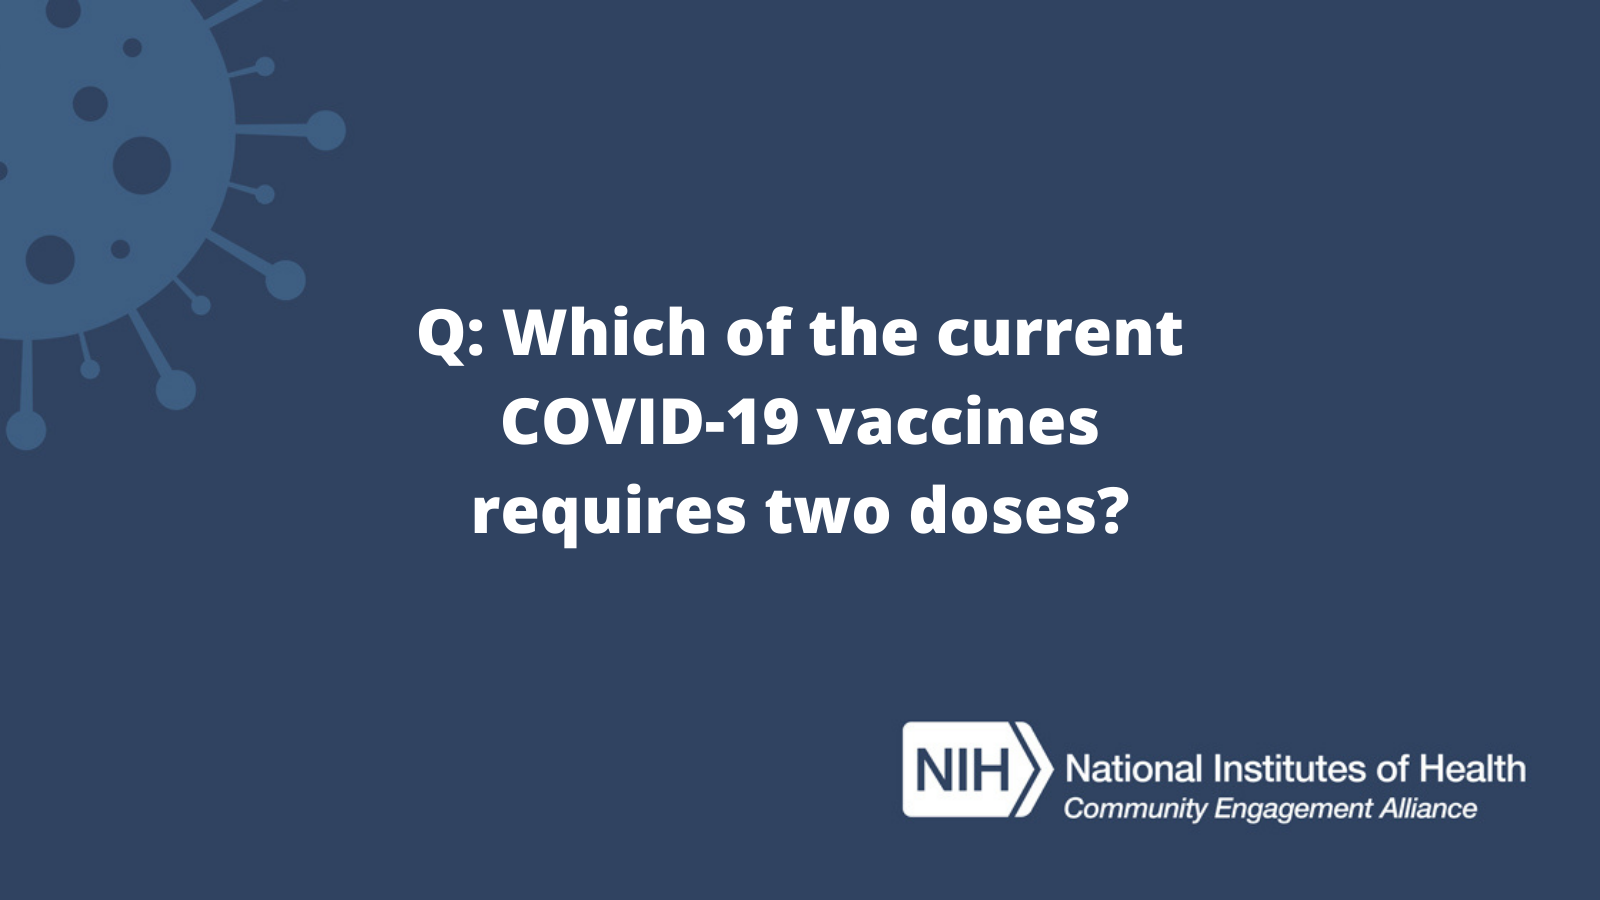 Q: Which of the current COVID-19 vaccines requires two doses?